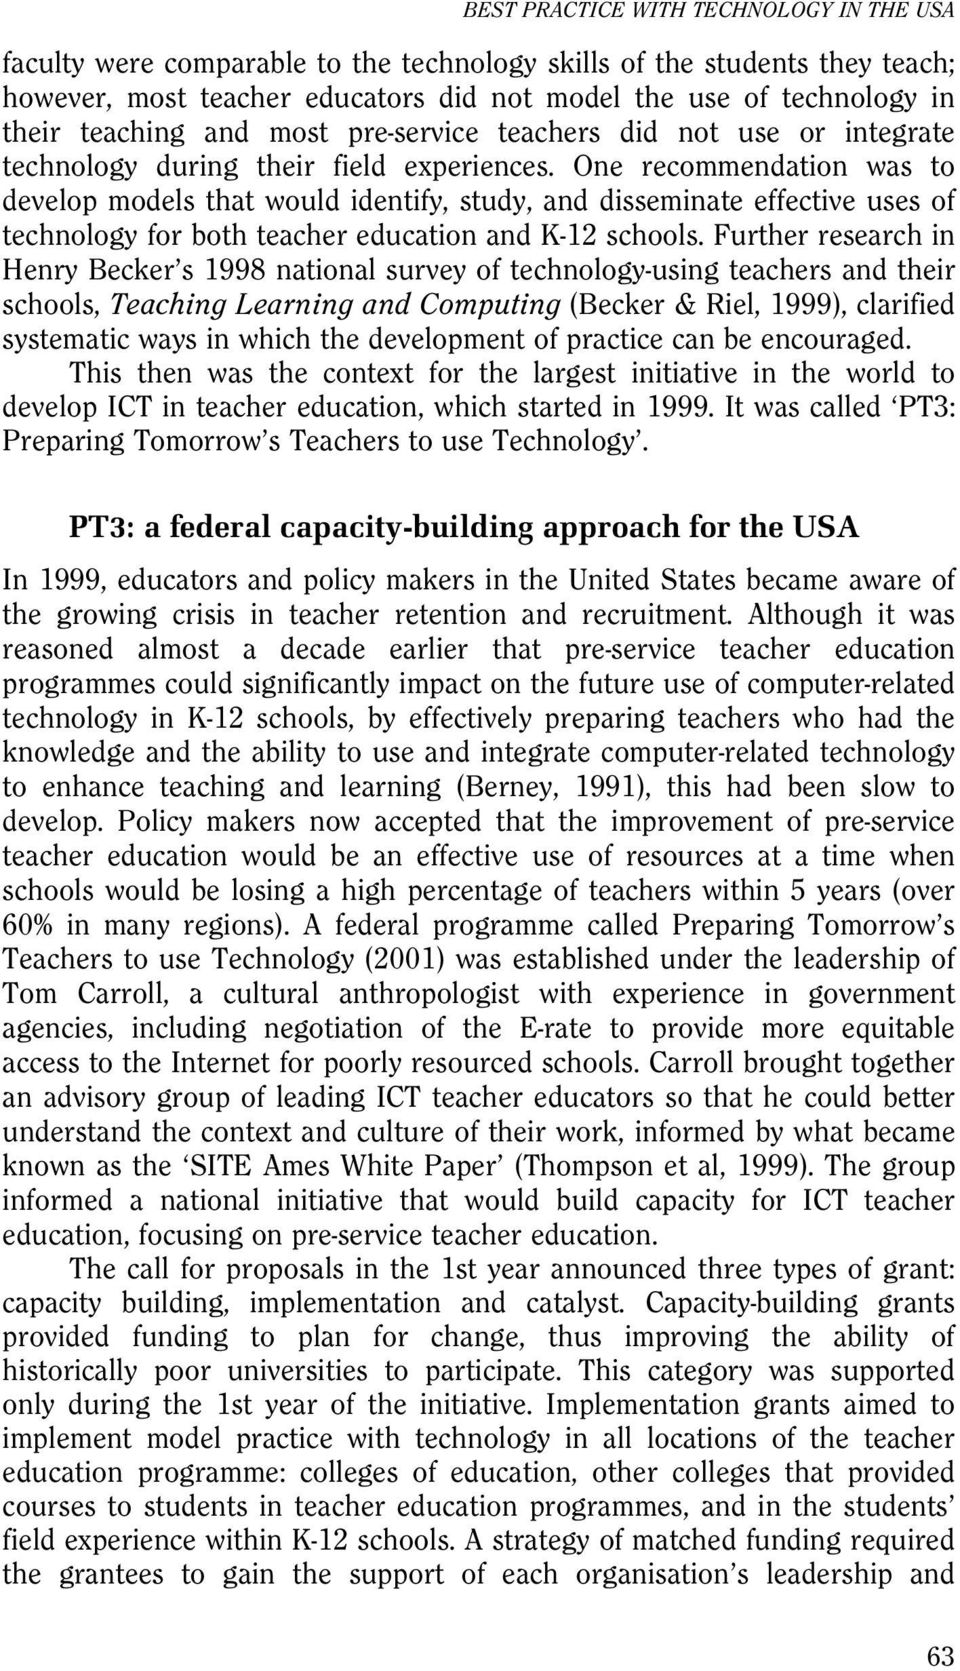 One recommendation was to develop models that would identify, study, and disseminate effective uses of technology for both teacher education and K-12 schools.